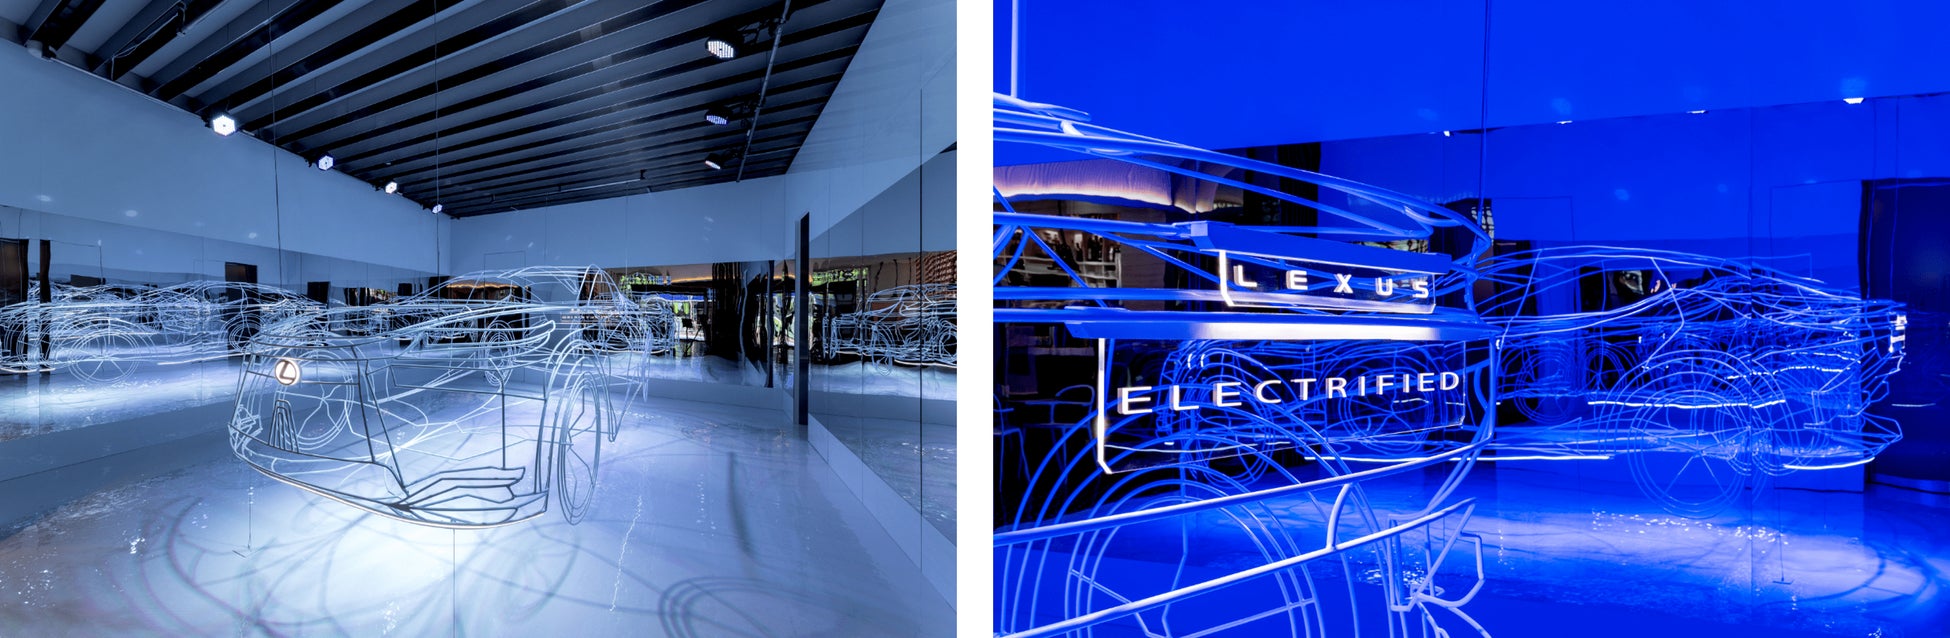 『‘ON /’The Electrified Future at INTERSECT BY LEXUS -TOKYO』5月25日（水）より展示開始